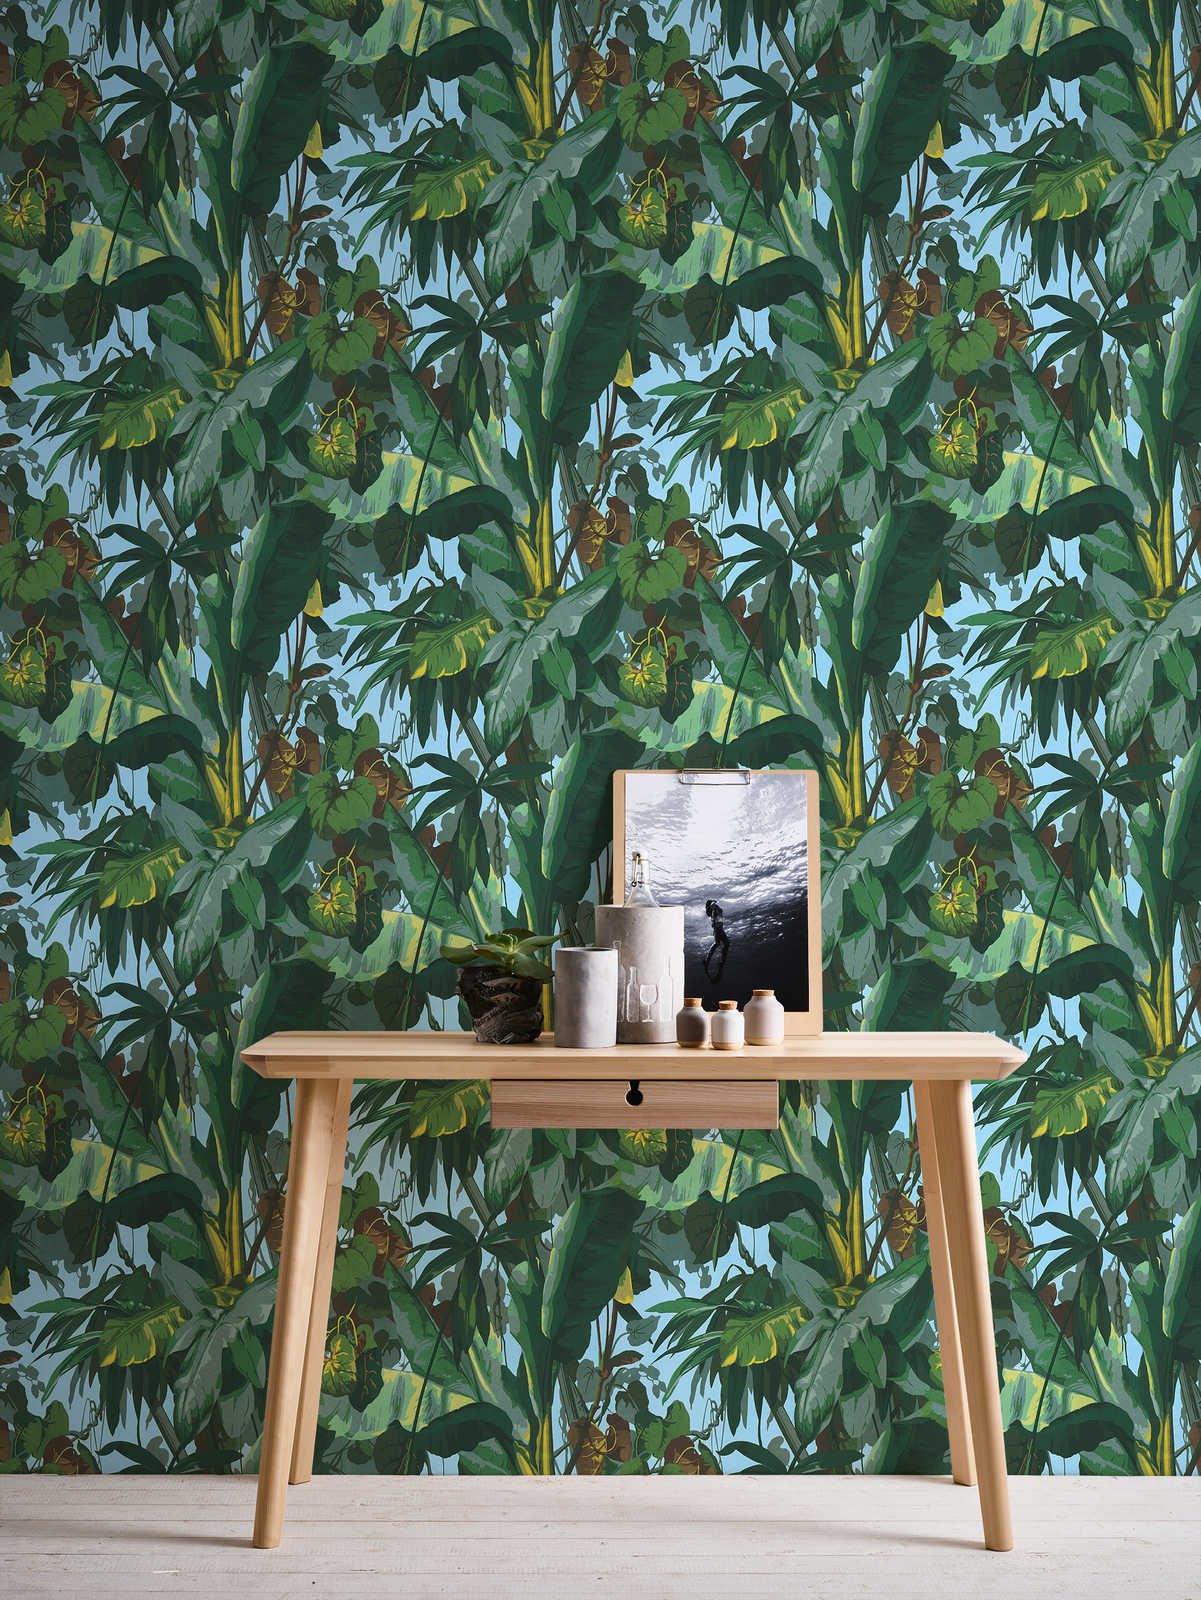             Self-adhesive wallpaper | jungle wallpaper with foliage forest - green, blue, yellow
        